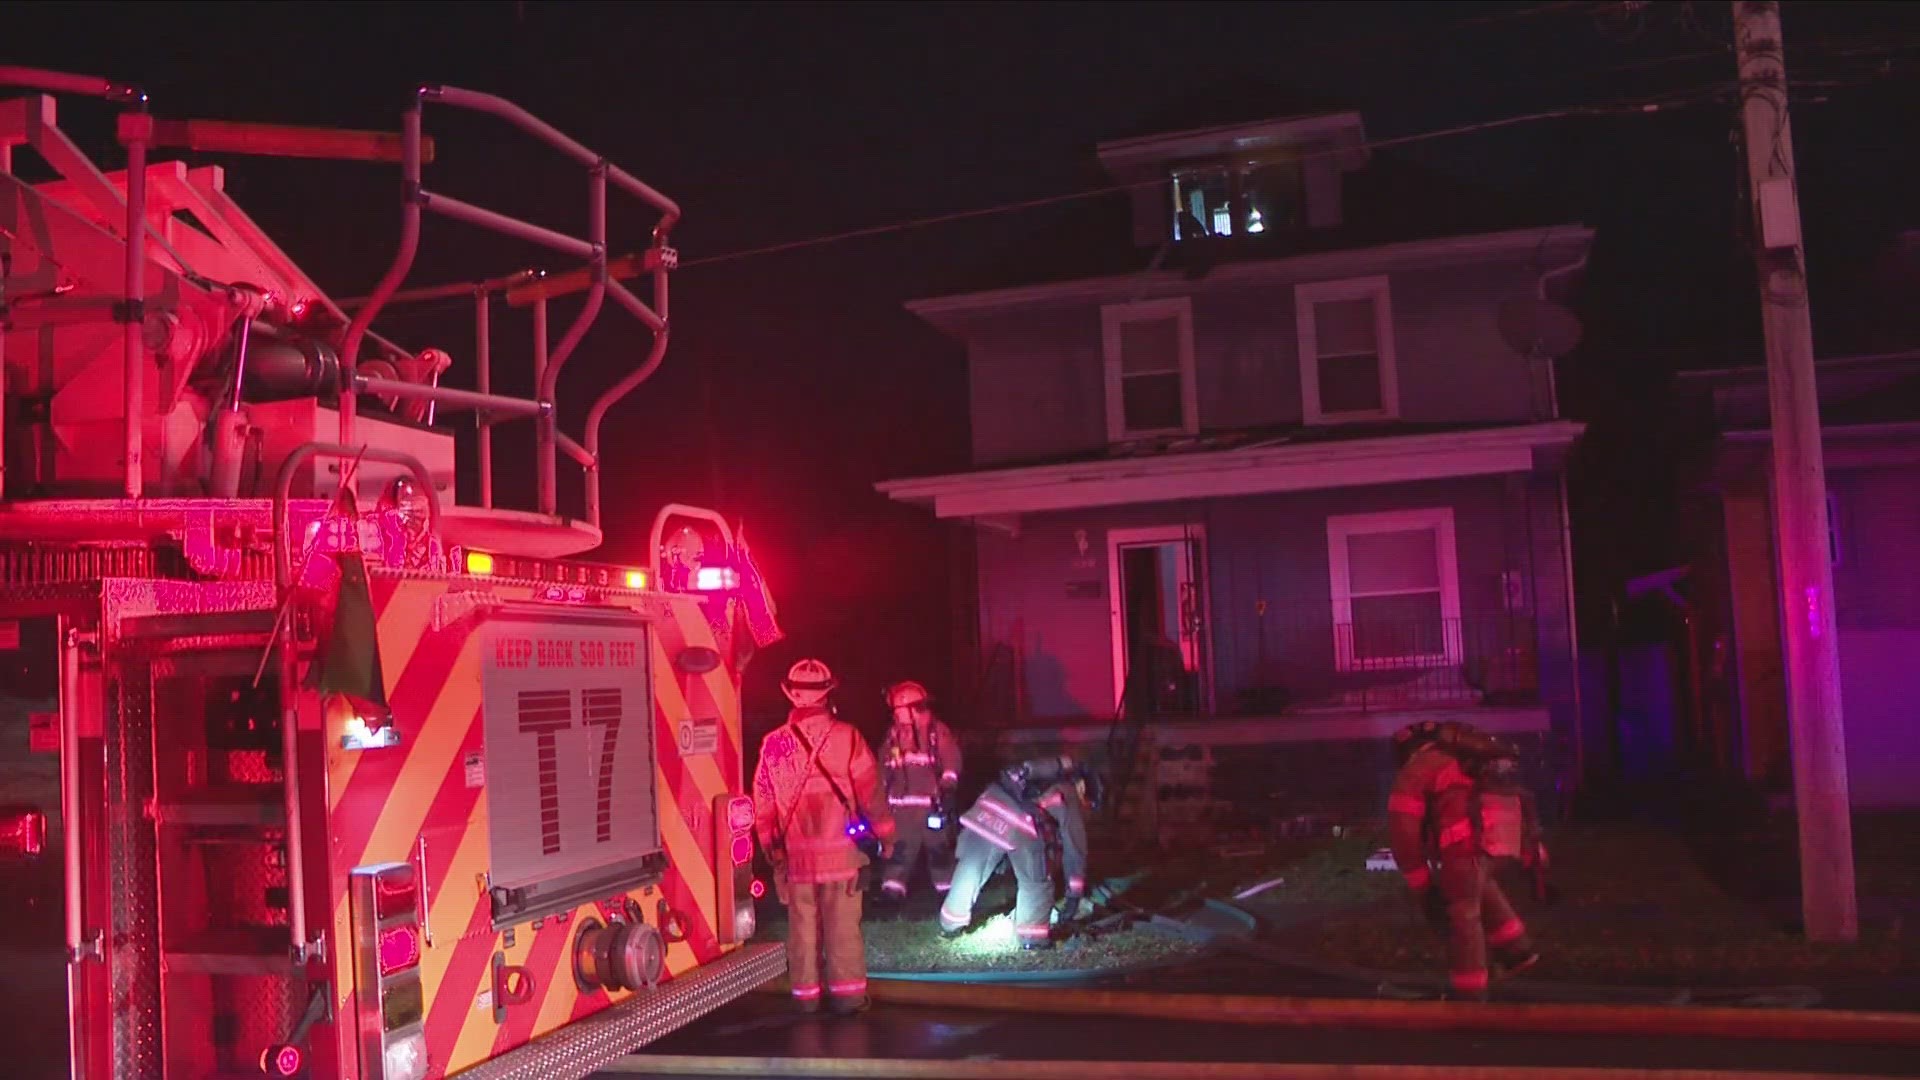 Buffalo Fire responded to initial reports of the fire coming from the roof area.